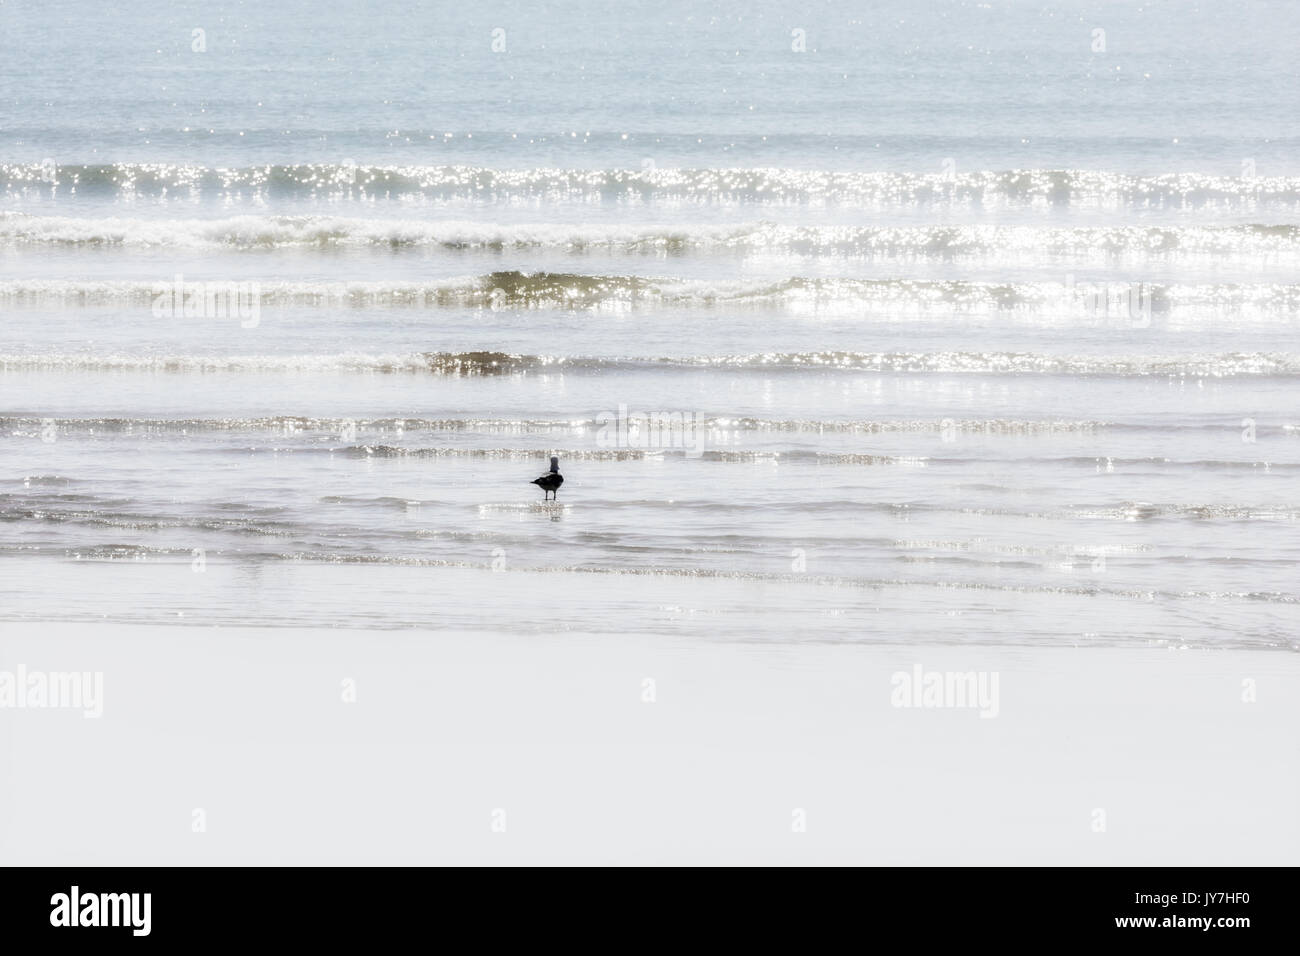 A seagull walks in the water at the beach of Essaouira, Morocco. Soft, glow, high key image. Stock Photo